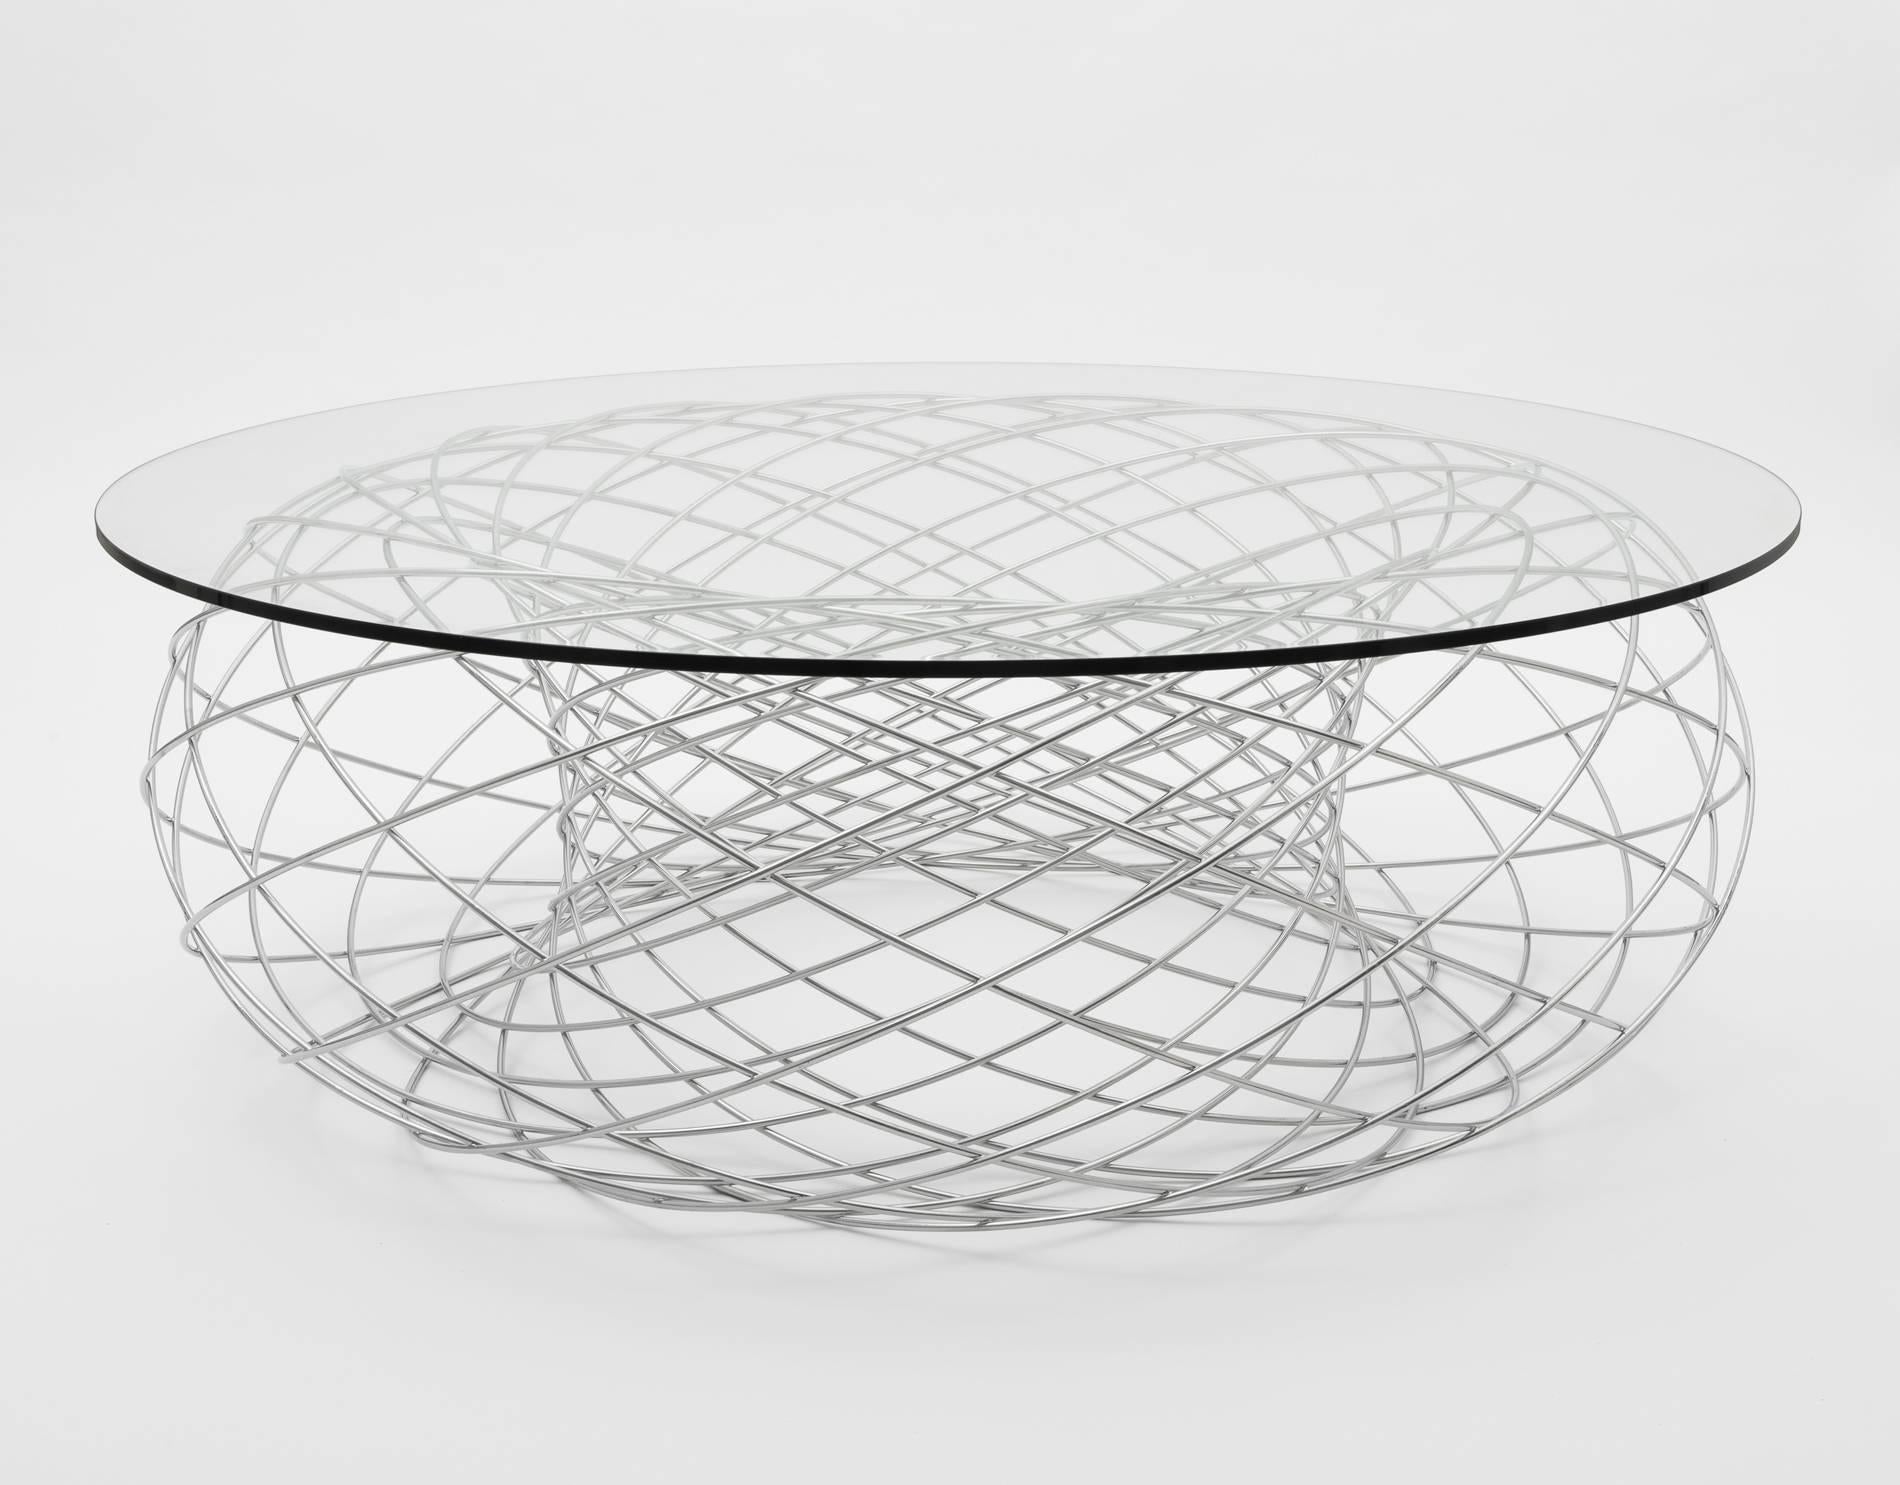 Philipp Aduatz
Villarceau Table, 2016
Powder coated steel, glass
18 x 55 x 55 in
Edition of 12 

Villarceau Table is a steel and glass table by Vienna based designer Philipp Aduatz.

The main influence of his work are scientific matters, these